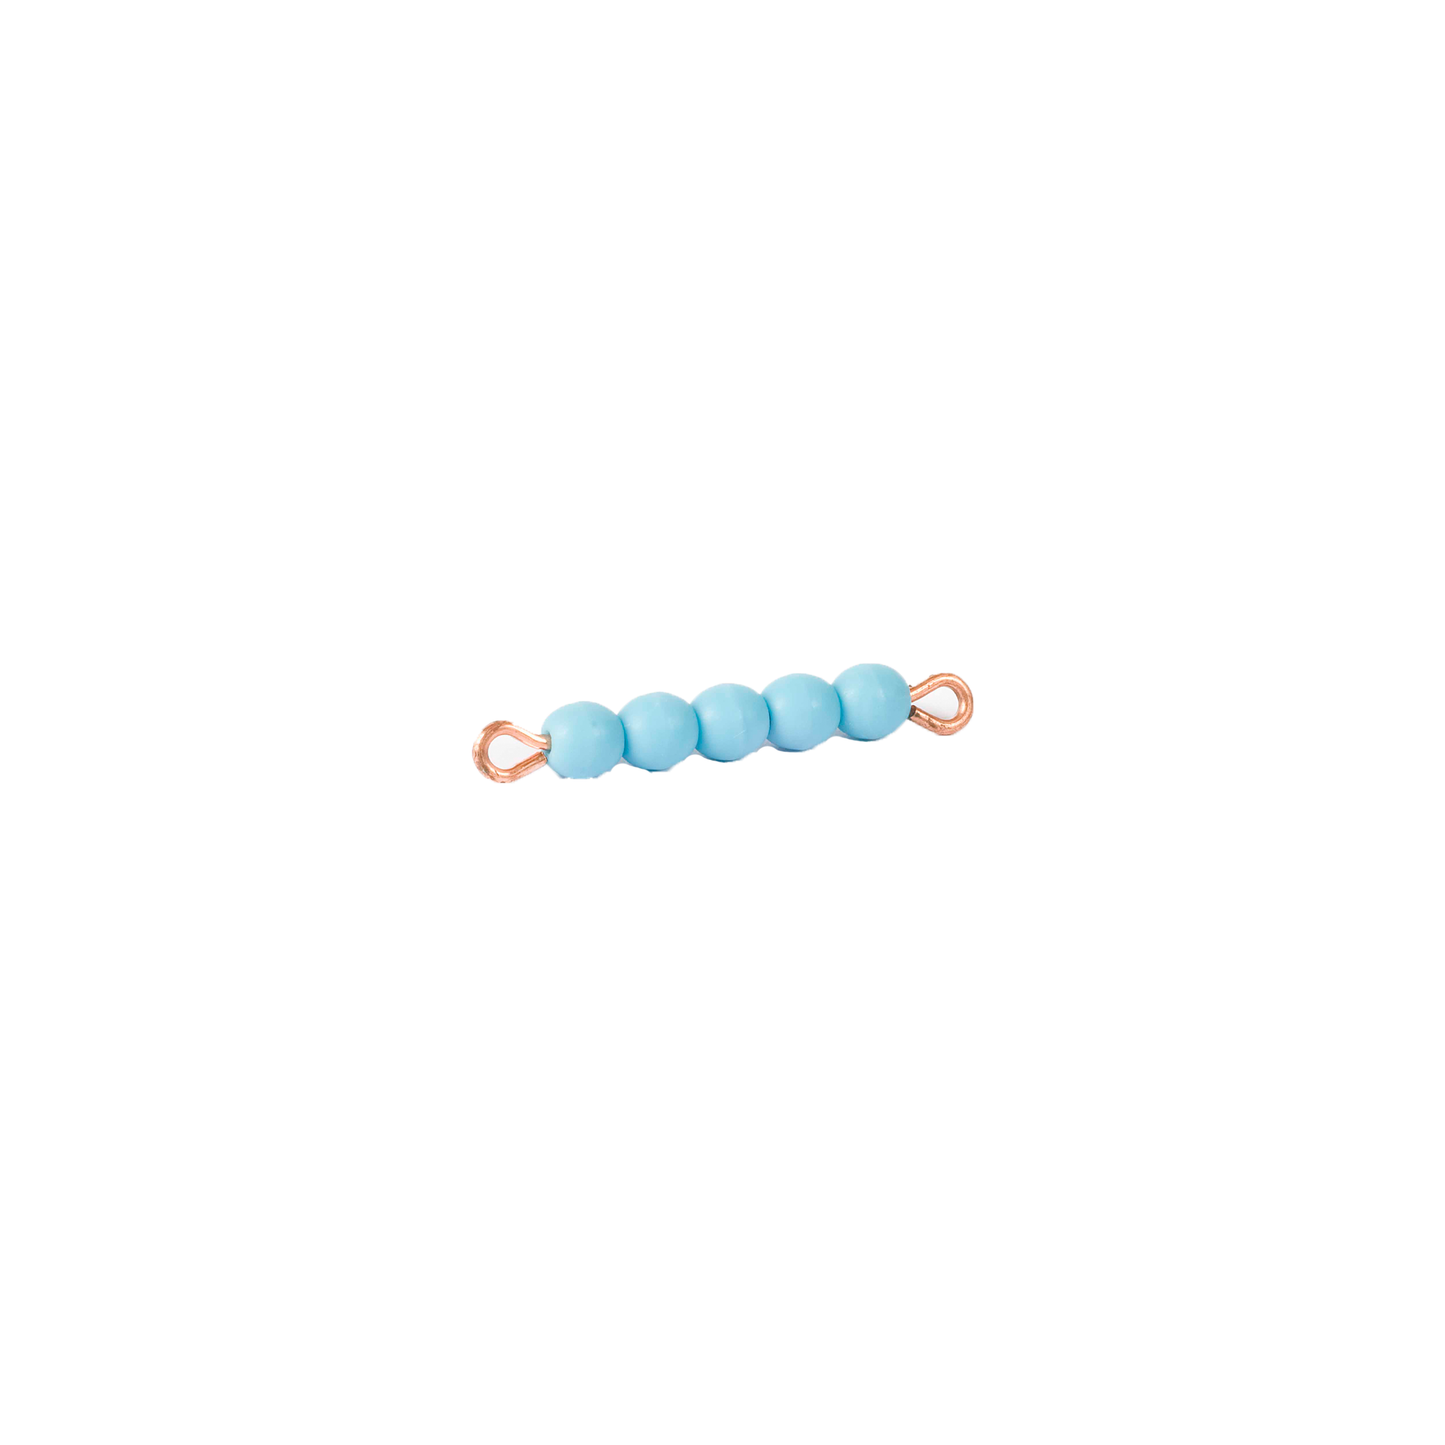 Bar of 5 in individual glass beads: light blue - Nienhuis AMI